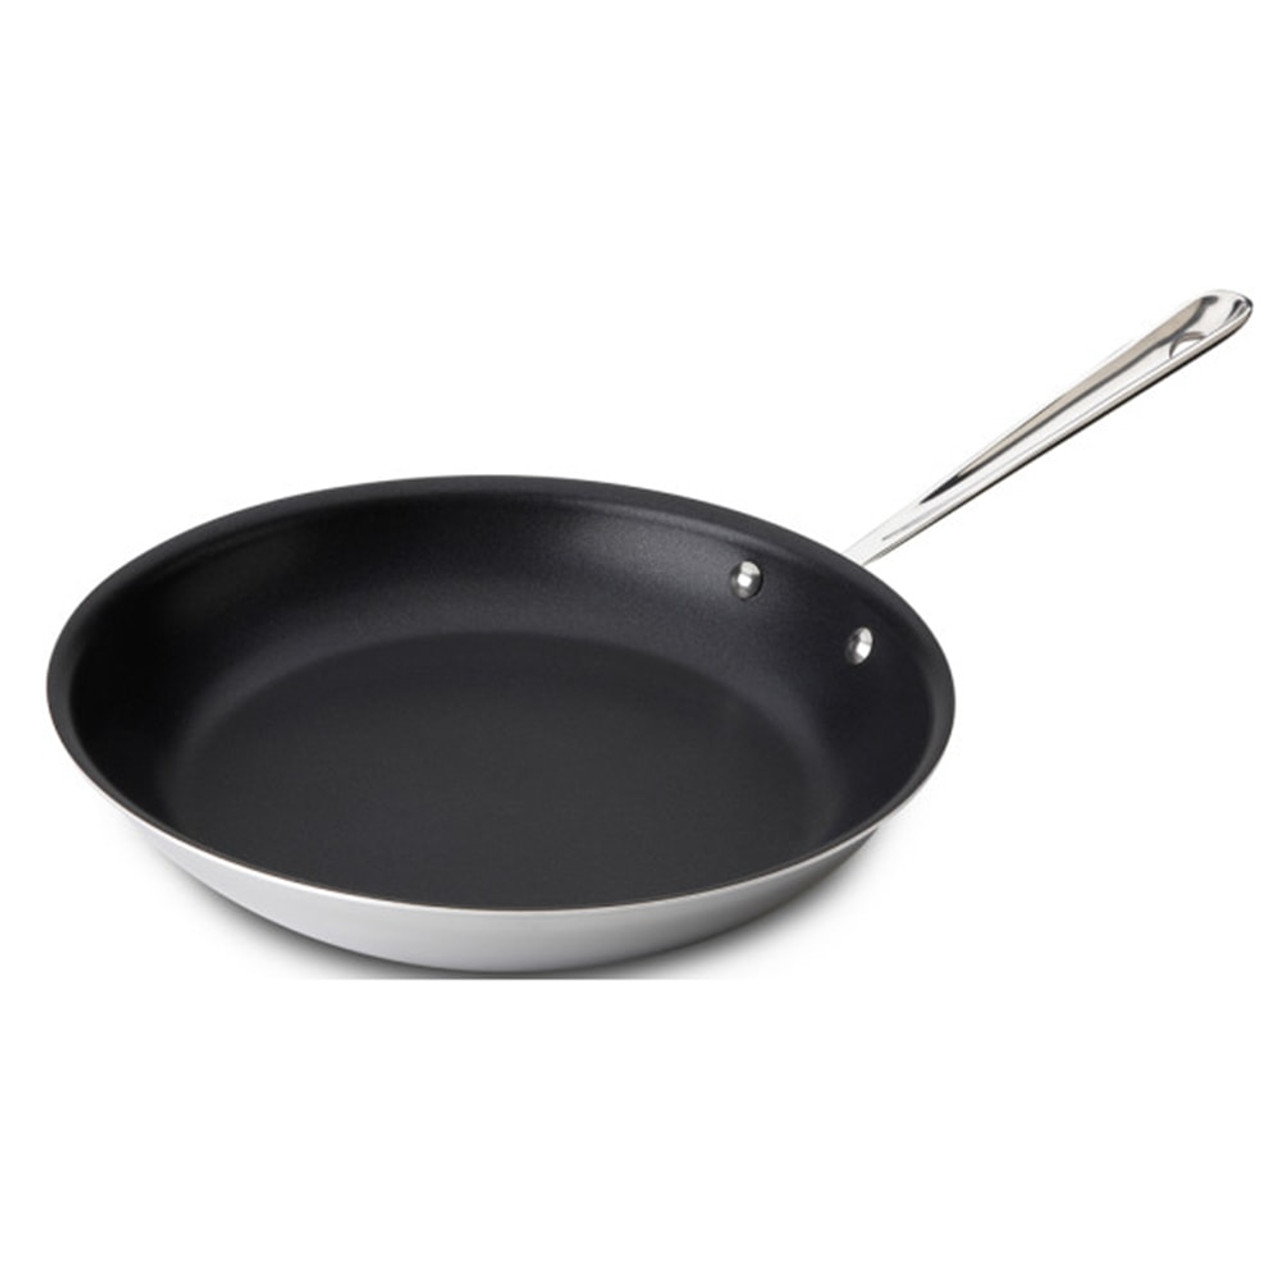 https://cdn11.bigcommerce.com/s-hccytny0od/images/stencil/1280x1280/products/489/1818/all-clad-stainless-steel-nonstick-fry-pan-12-inch__16198.1510958737.jpg?c=2?imbypass=on